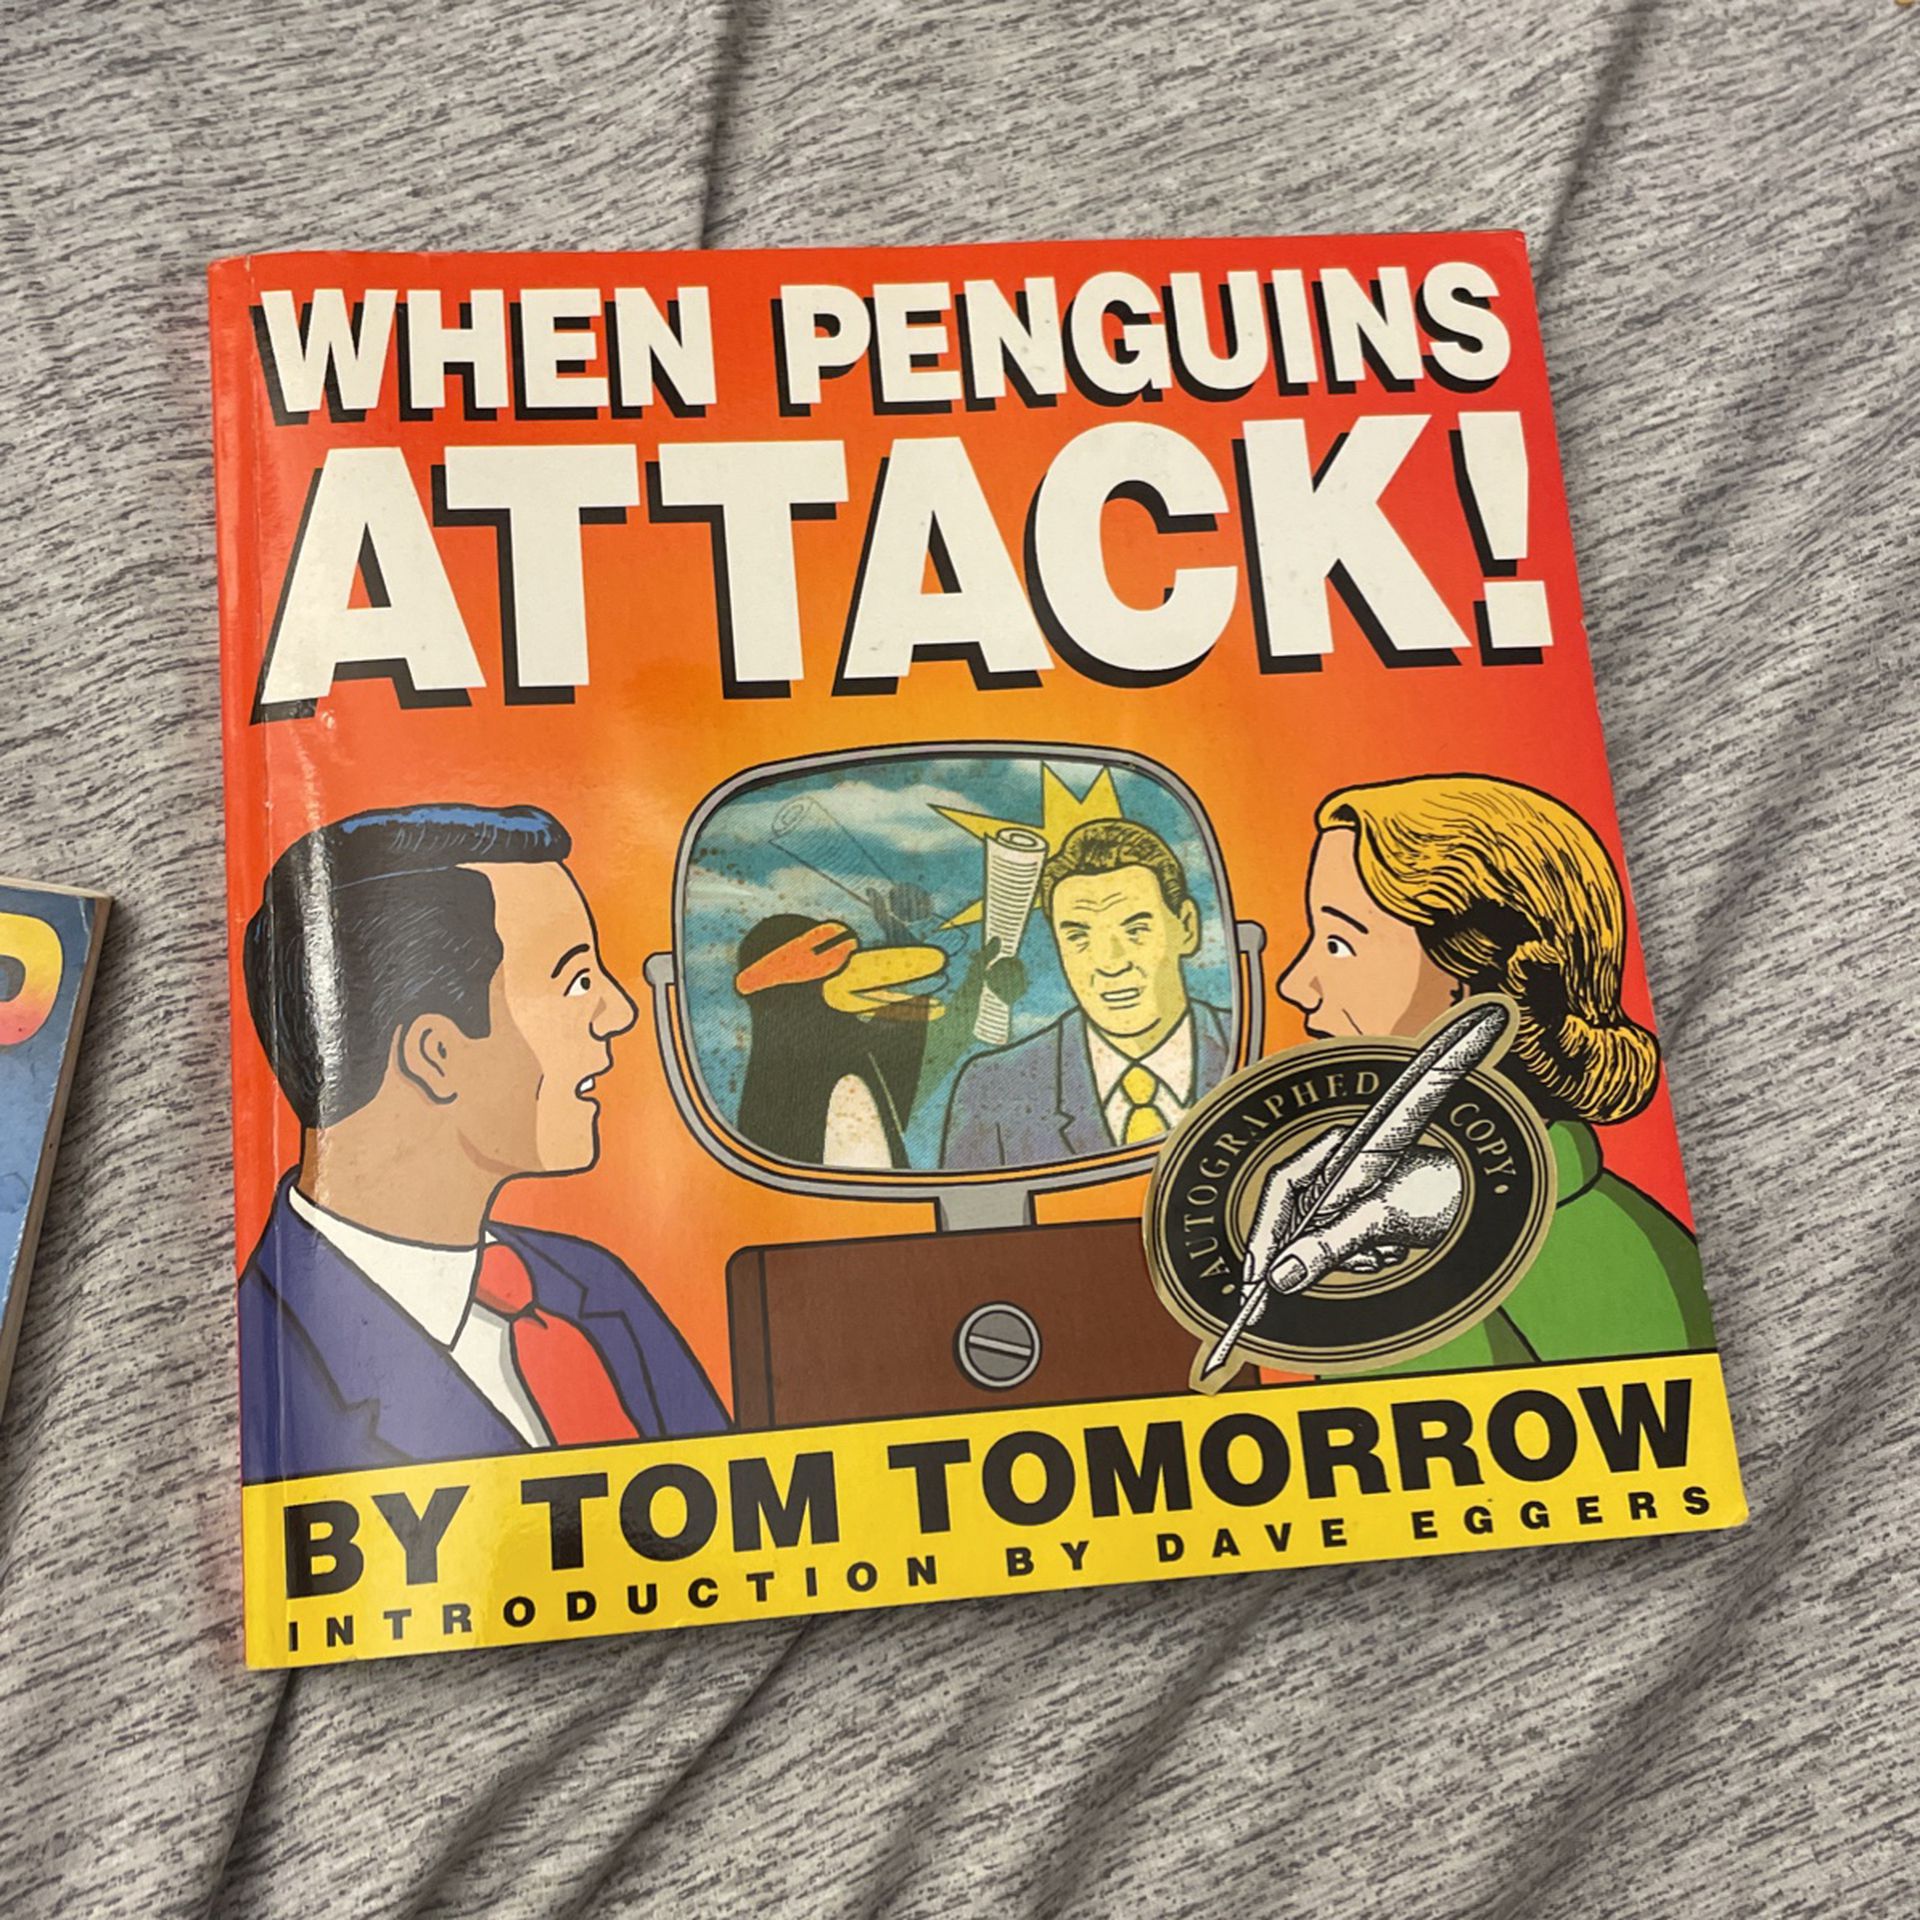  When  penguins Attack Book Signed by Tom tomorrow